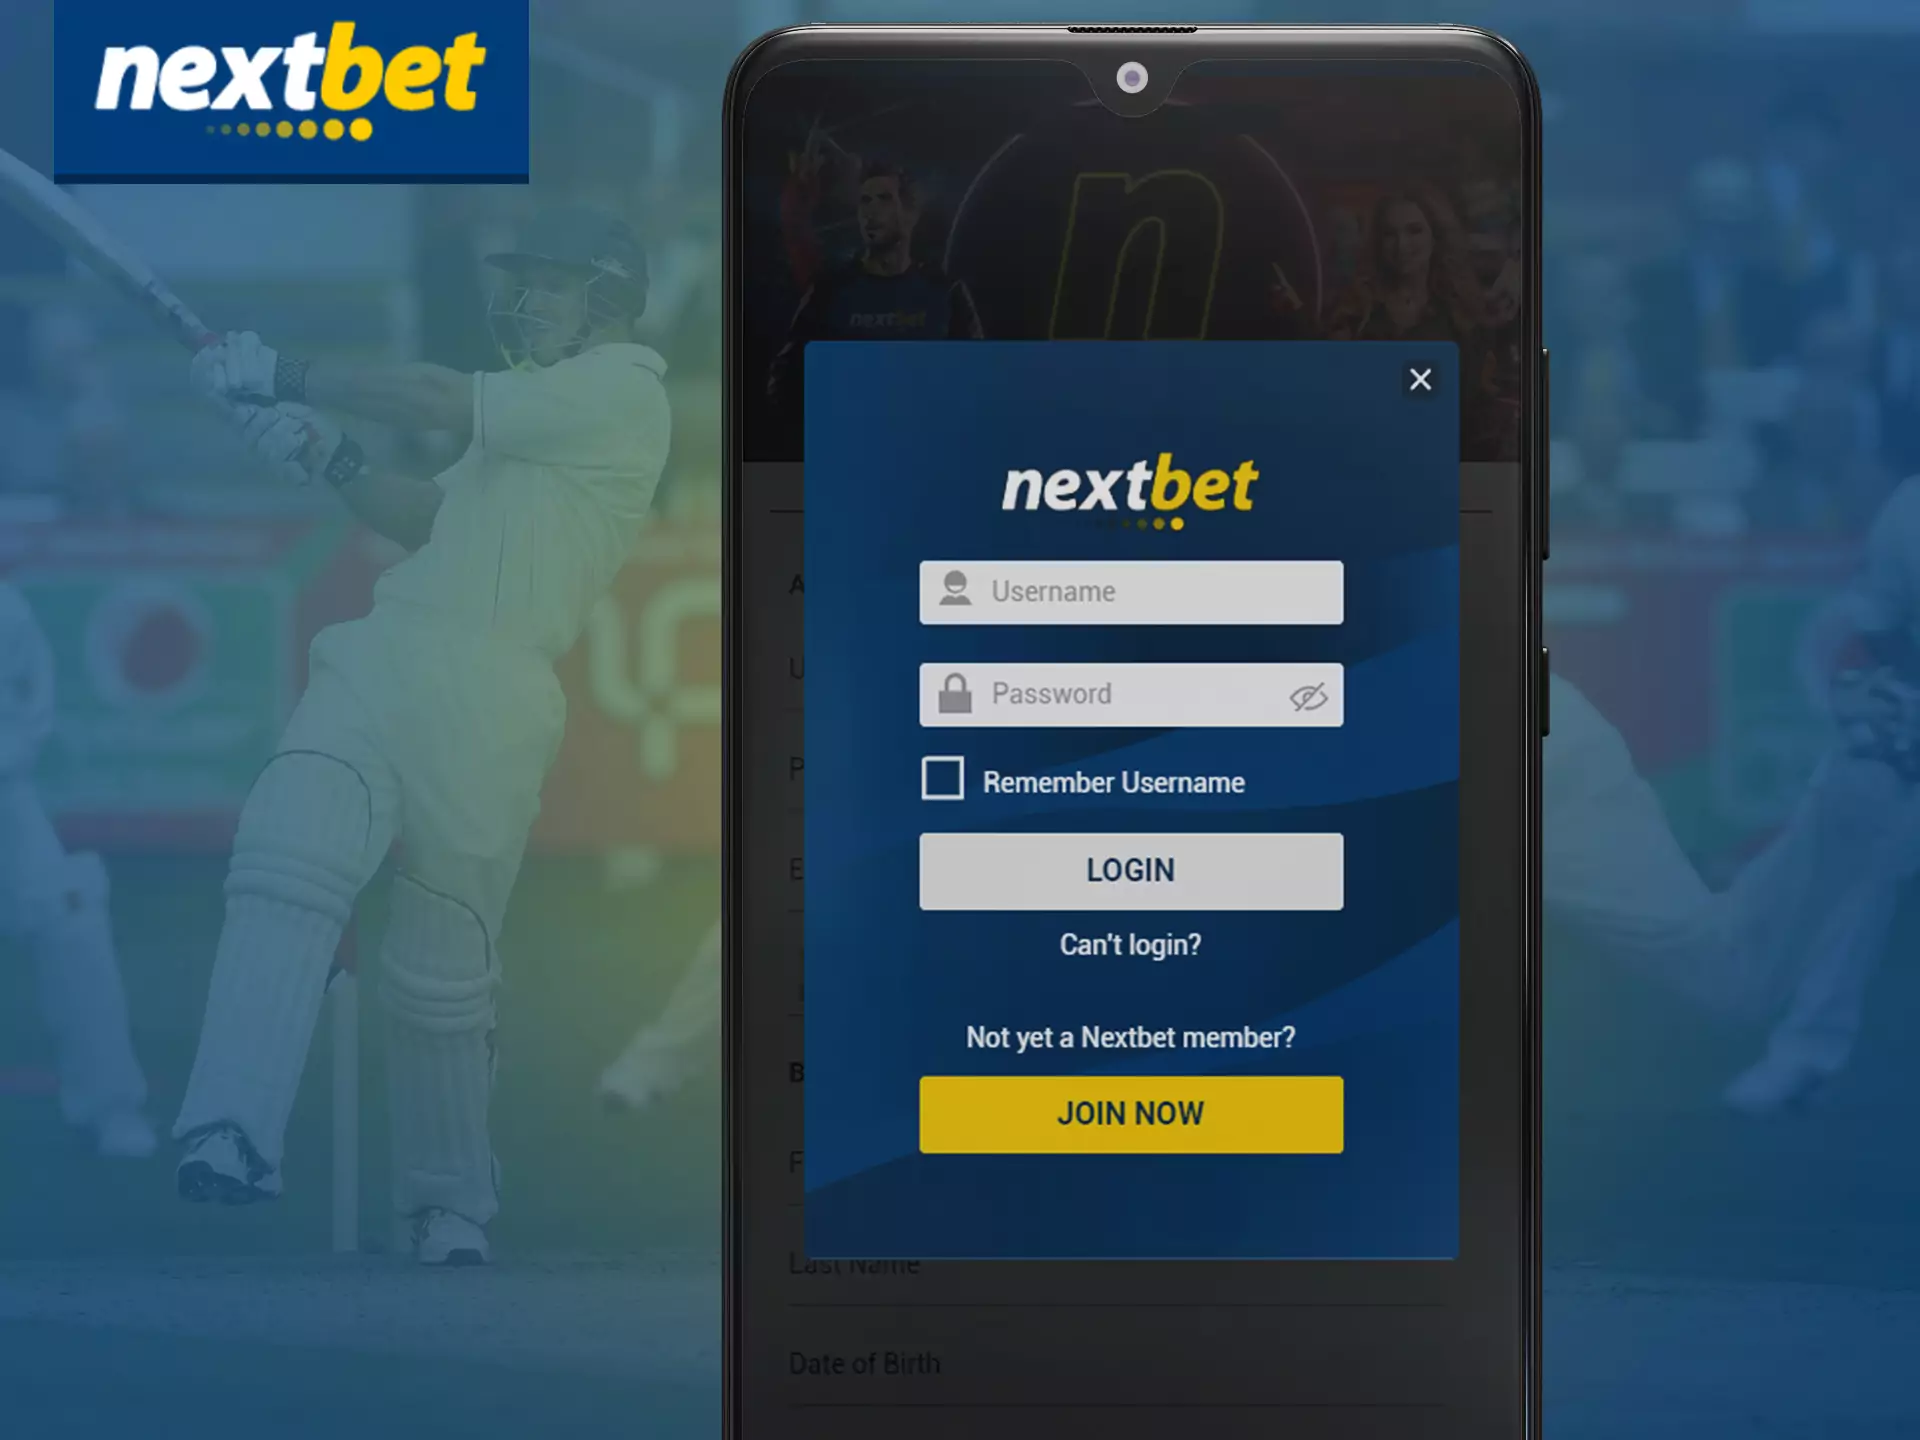 Log in to your Nextbet account to get full access to all features and bonuses.